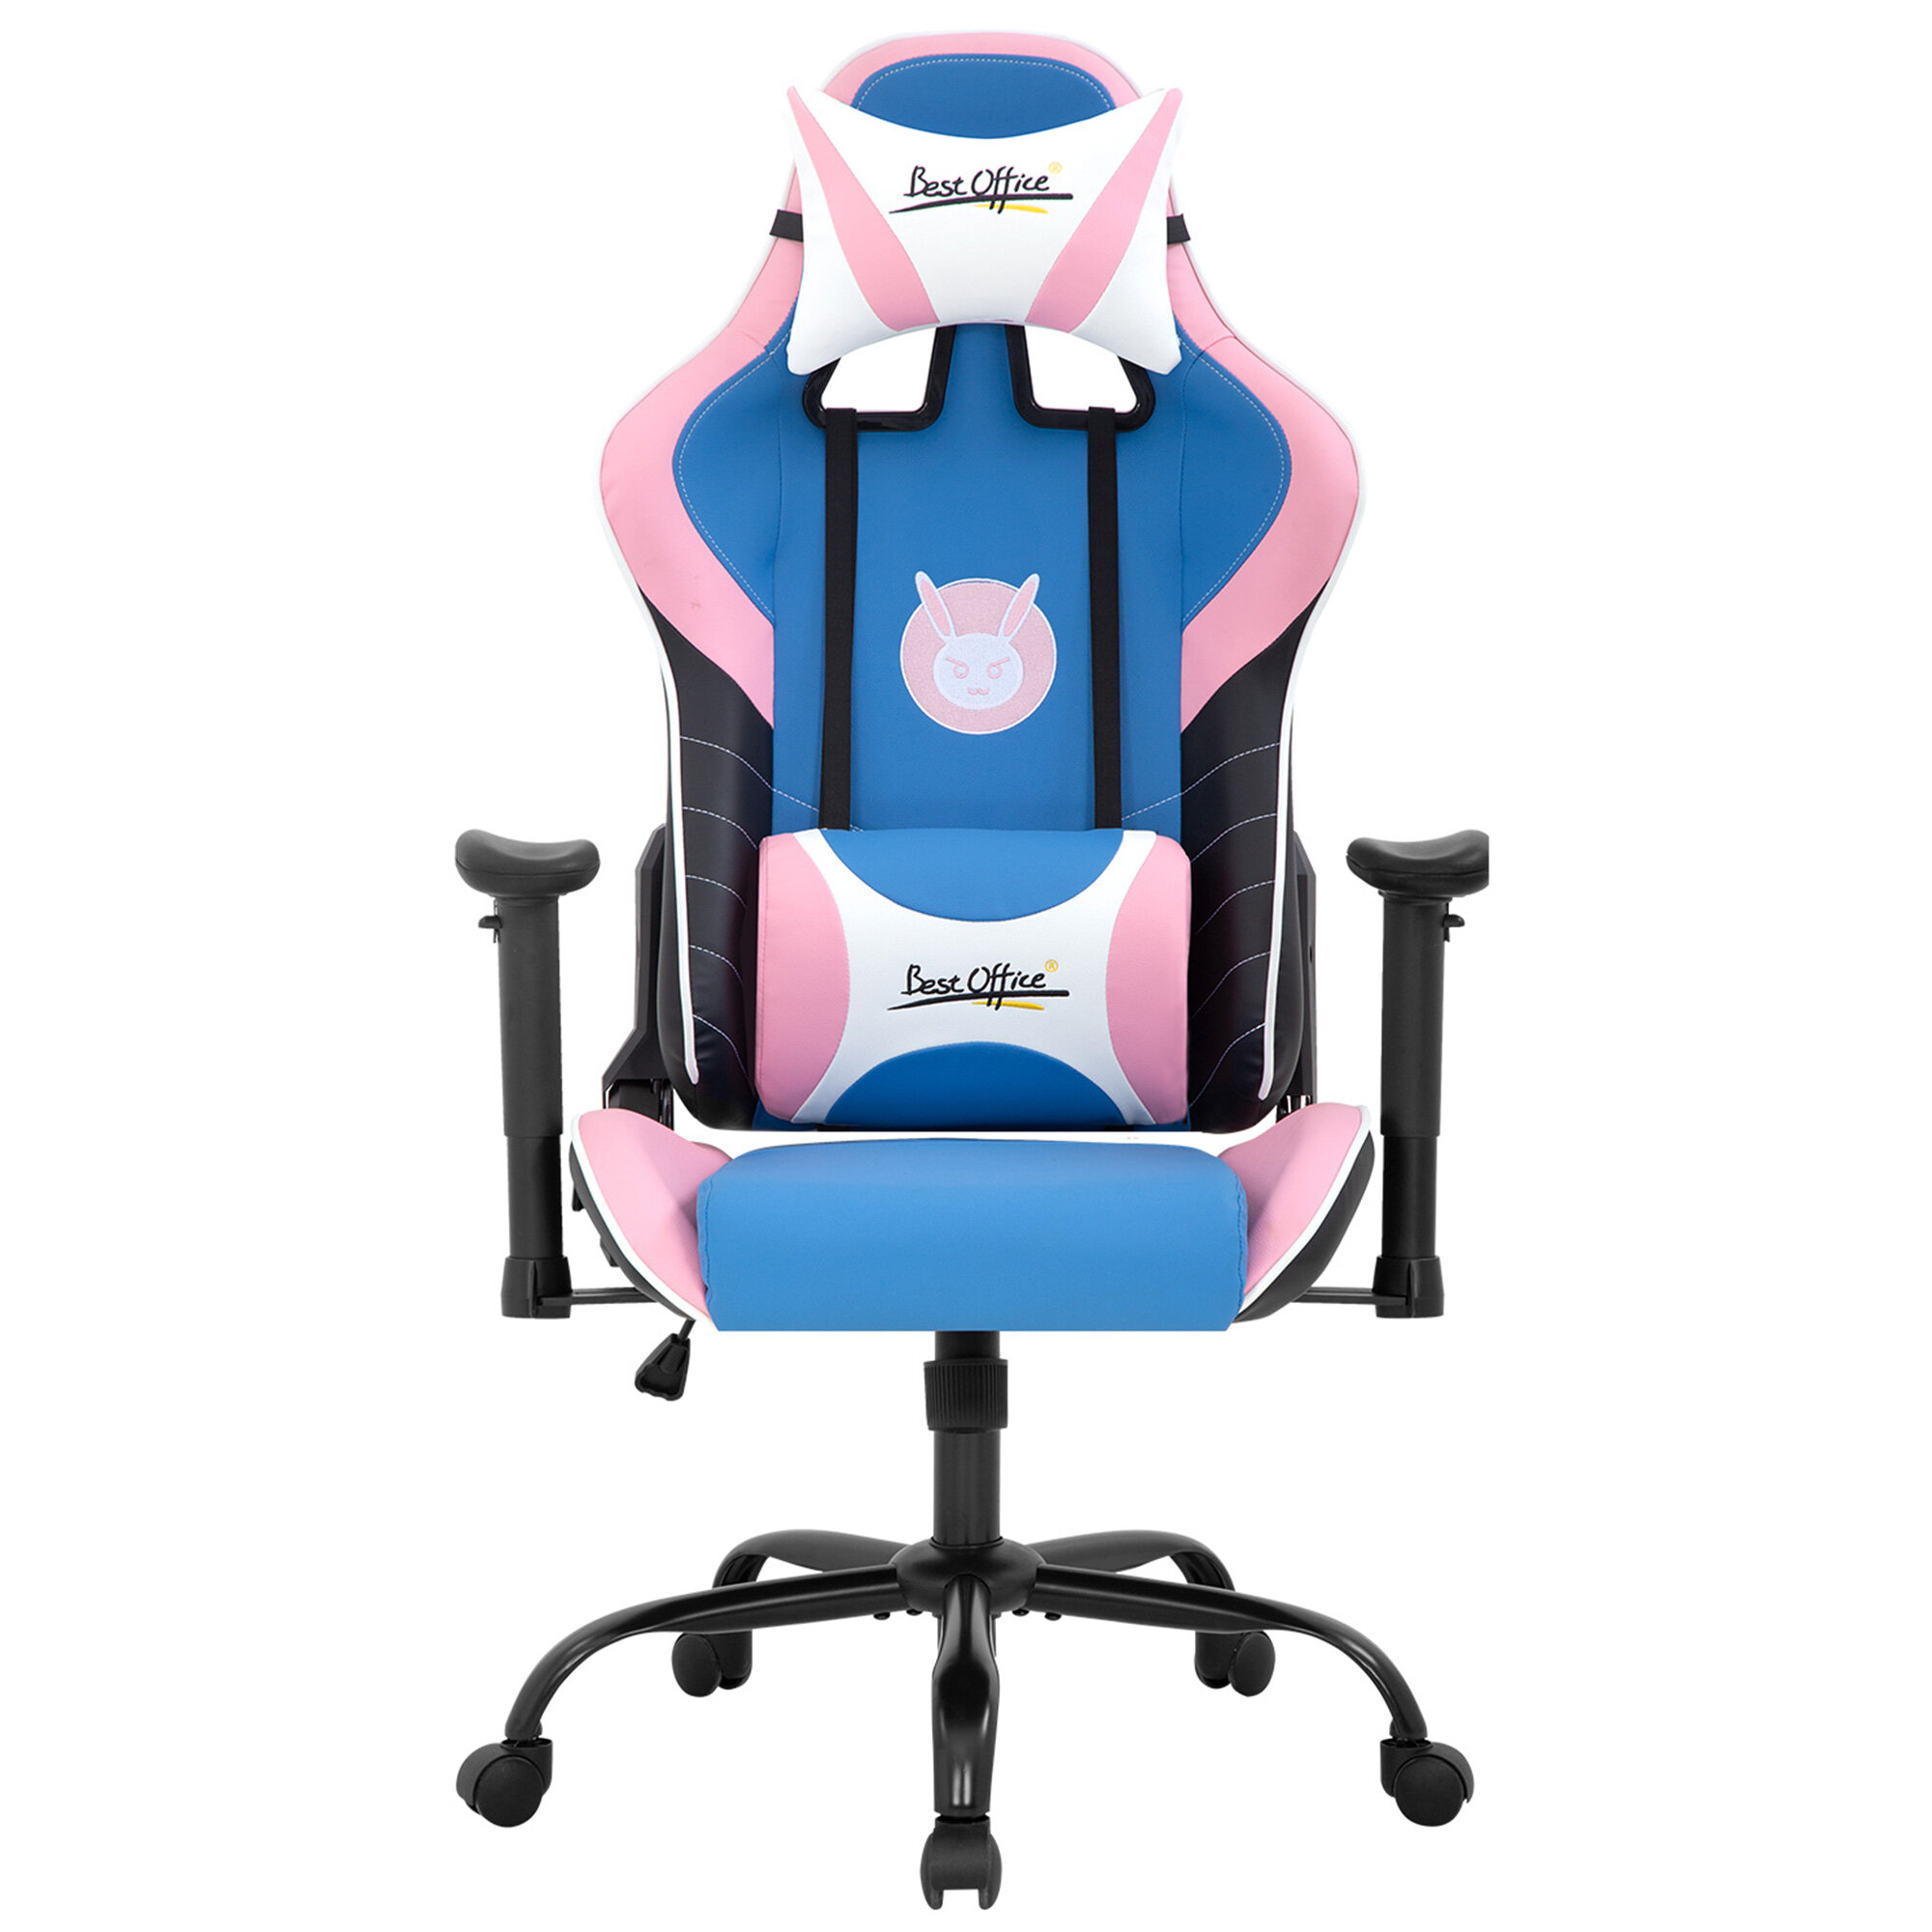 Adults Ergonomic Racing Style High Back Computer Chair with Footrest Headrest and Lumbar Support Kiso Inc Color: Pink